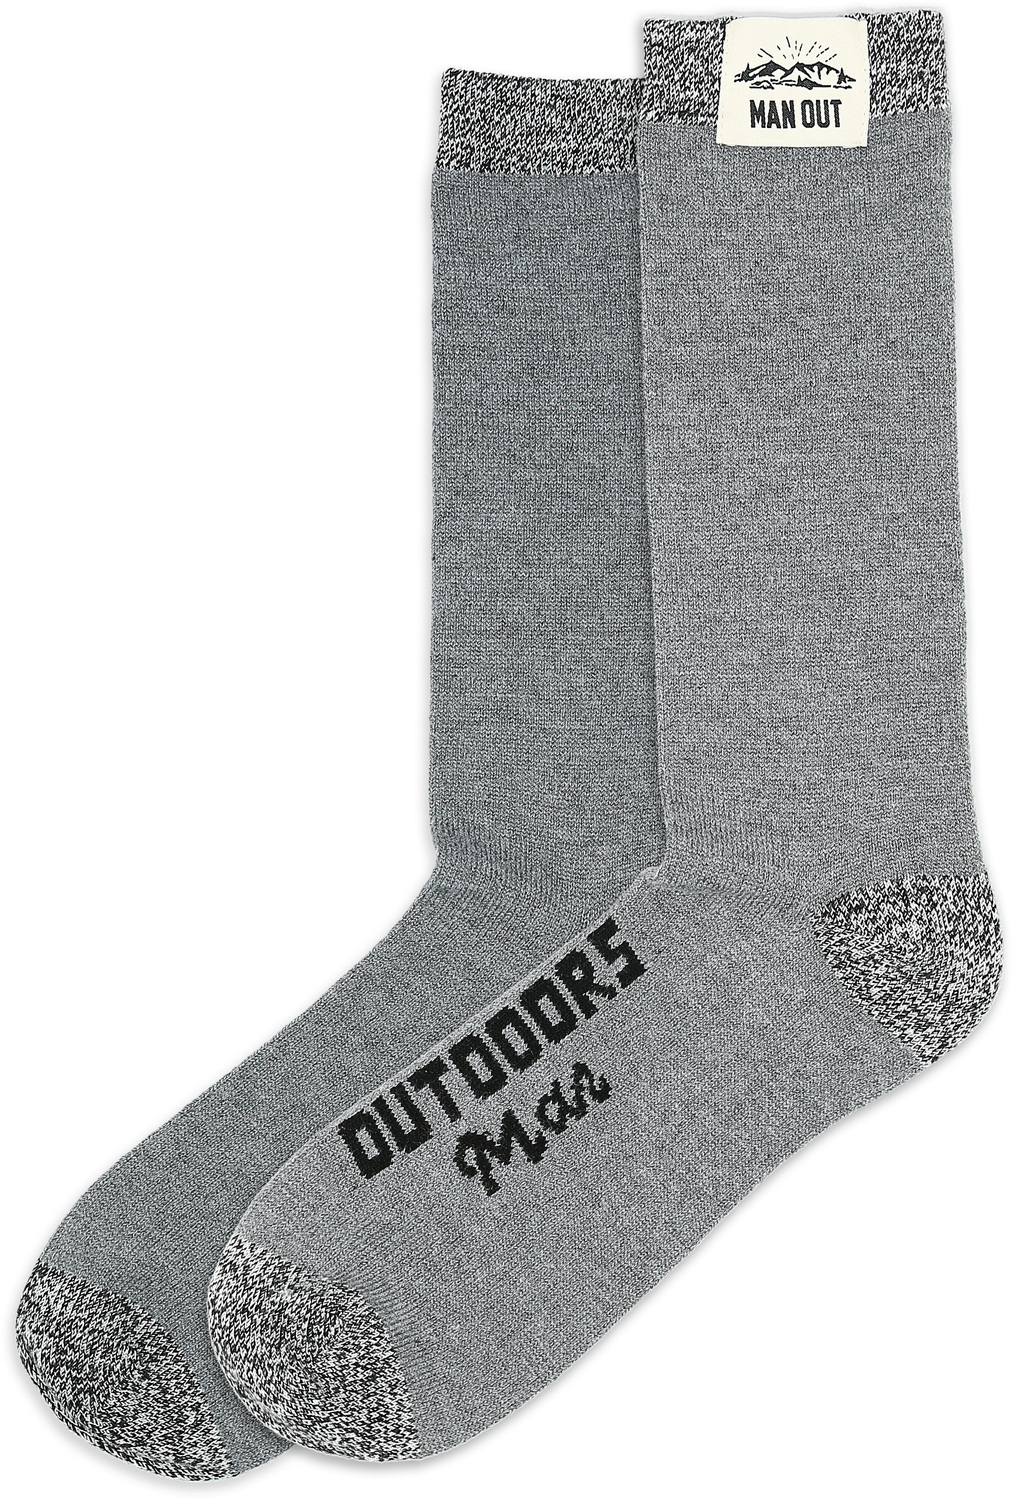 Outdoors Man by Man Out - Outdoors Man - Men's Socks